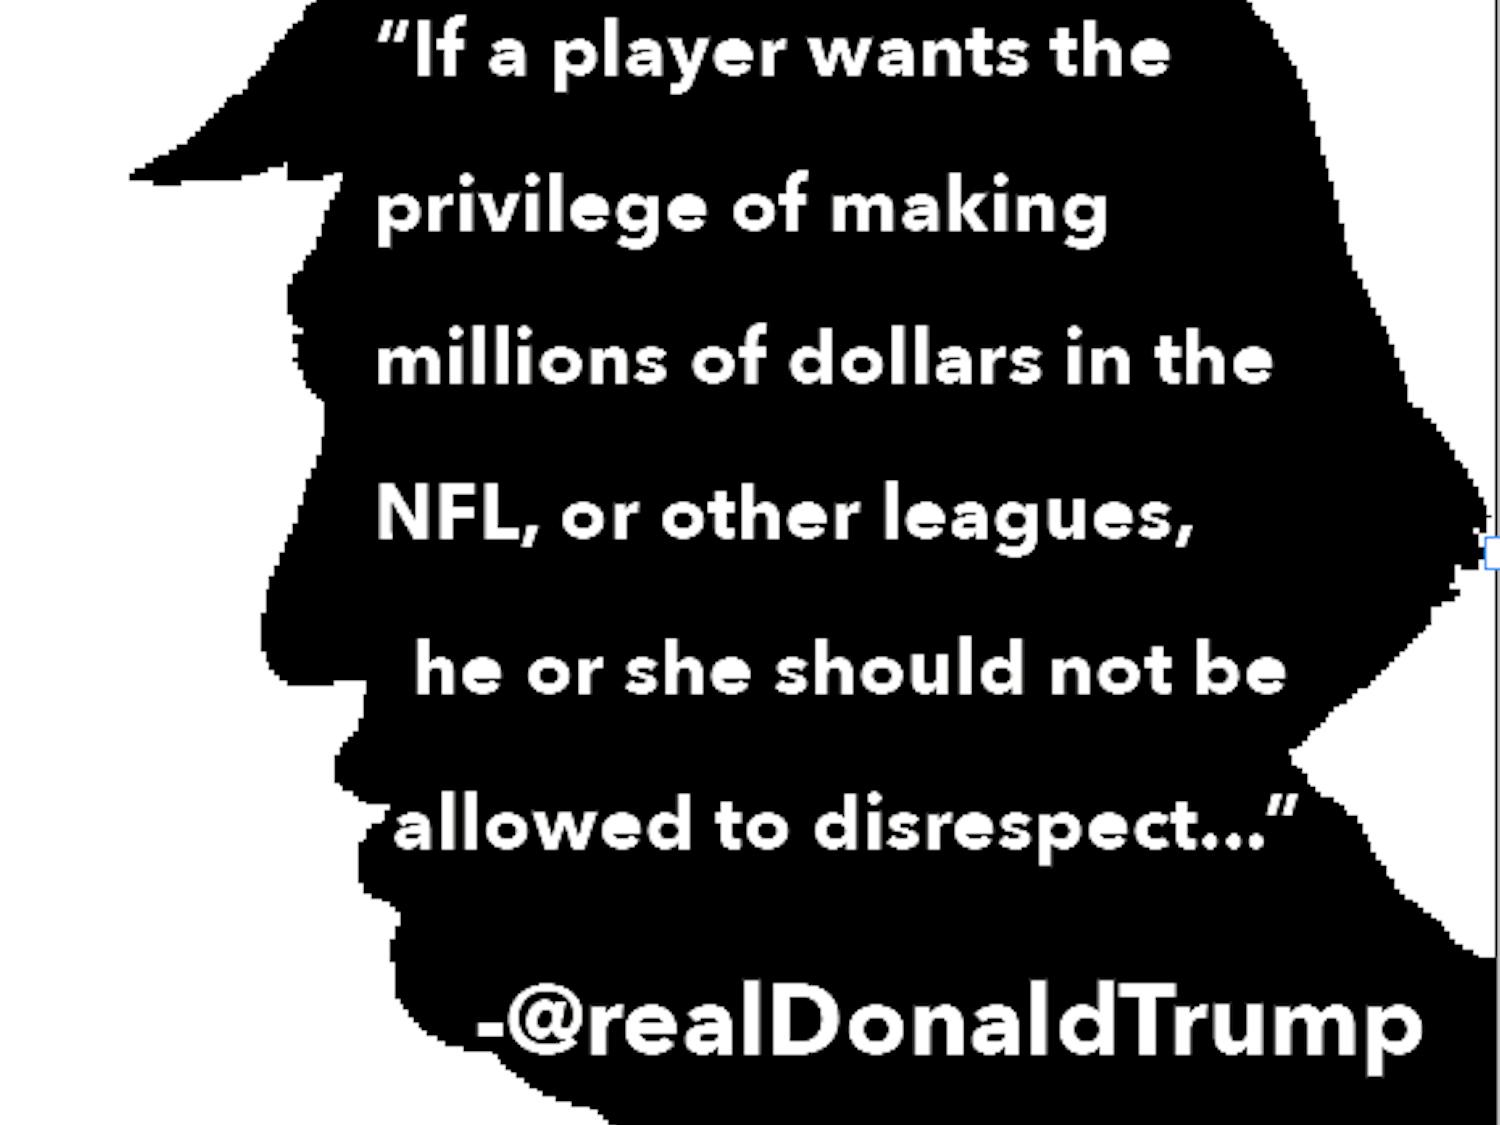 The president's tweets on NFL protests: